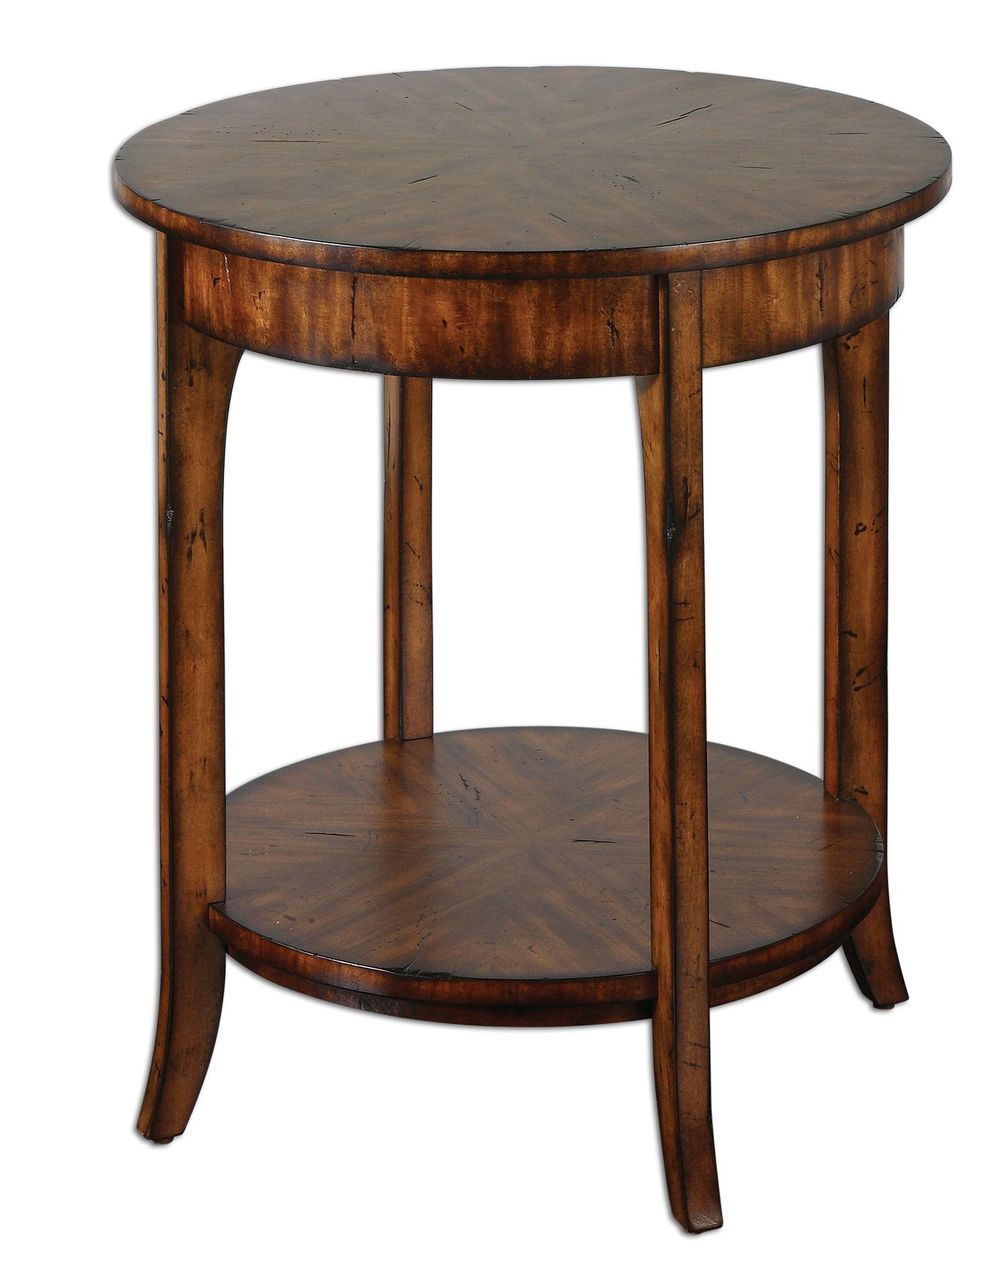 elegant rustic round wood accent table swanky home inch high teal tablecloth coffee and sofa set carpet transition piece distressed end tables stand legs magnussen threshold seal